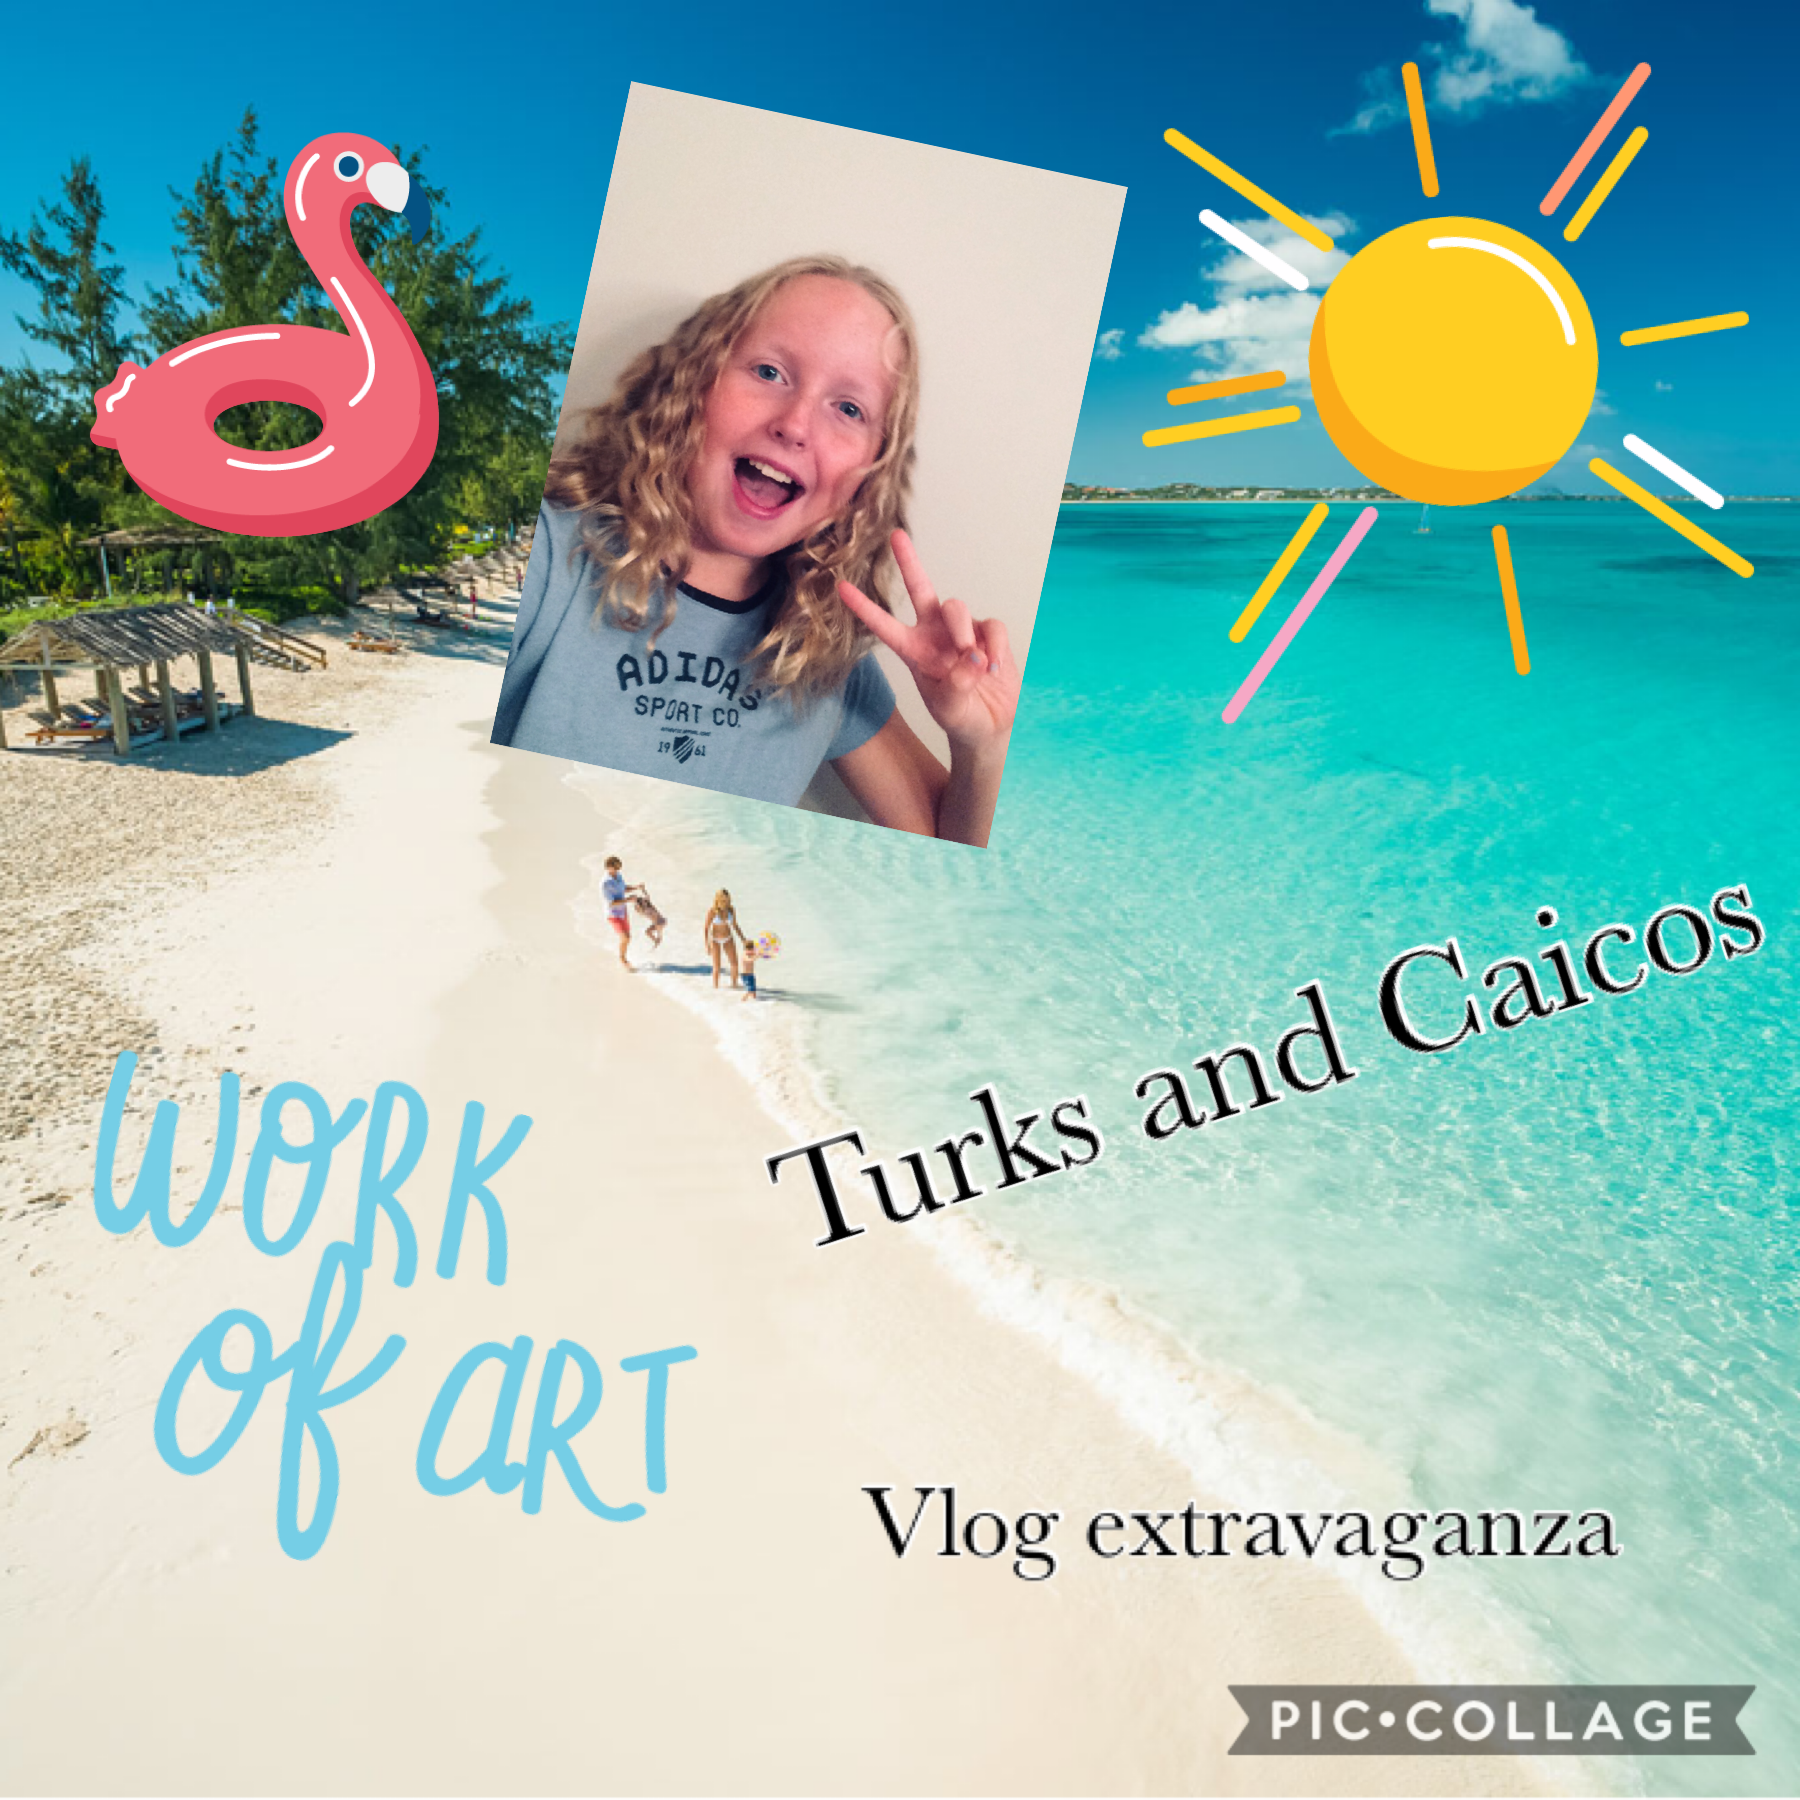 I’m going to try to post more of my vacations. Just to fill you in I take lots of vacation. I’d love to share them with you. Here is one from my Turks and Caicos vlog intro. 